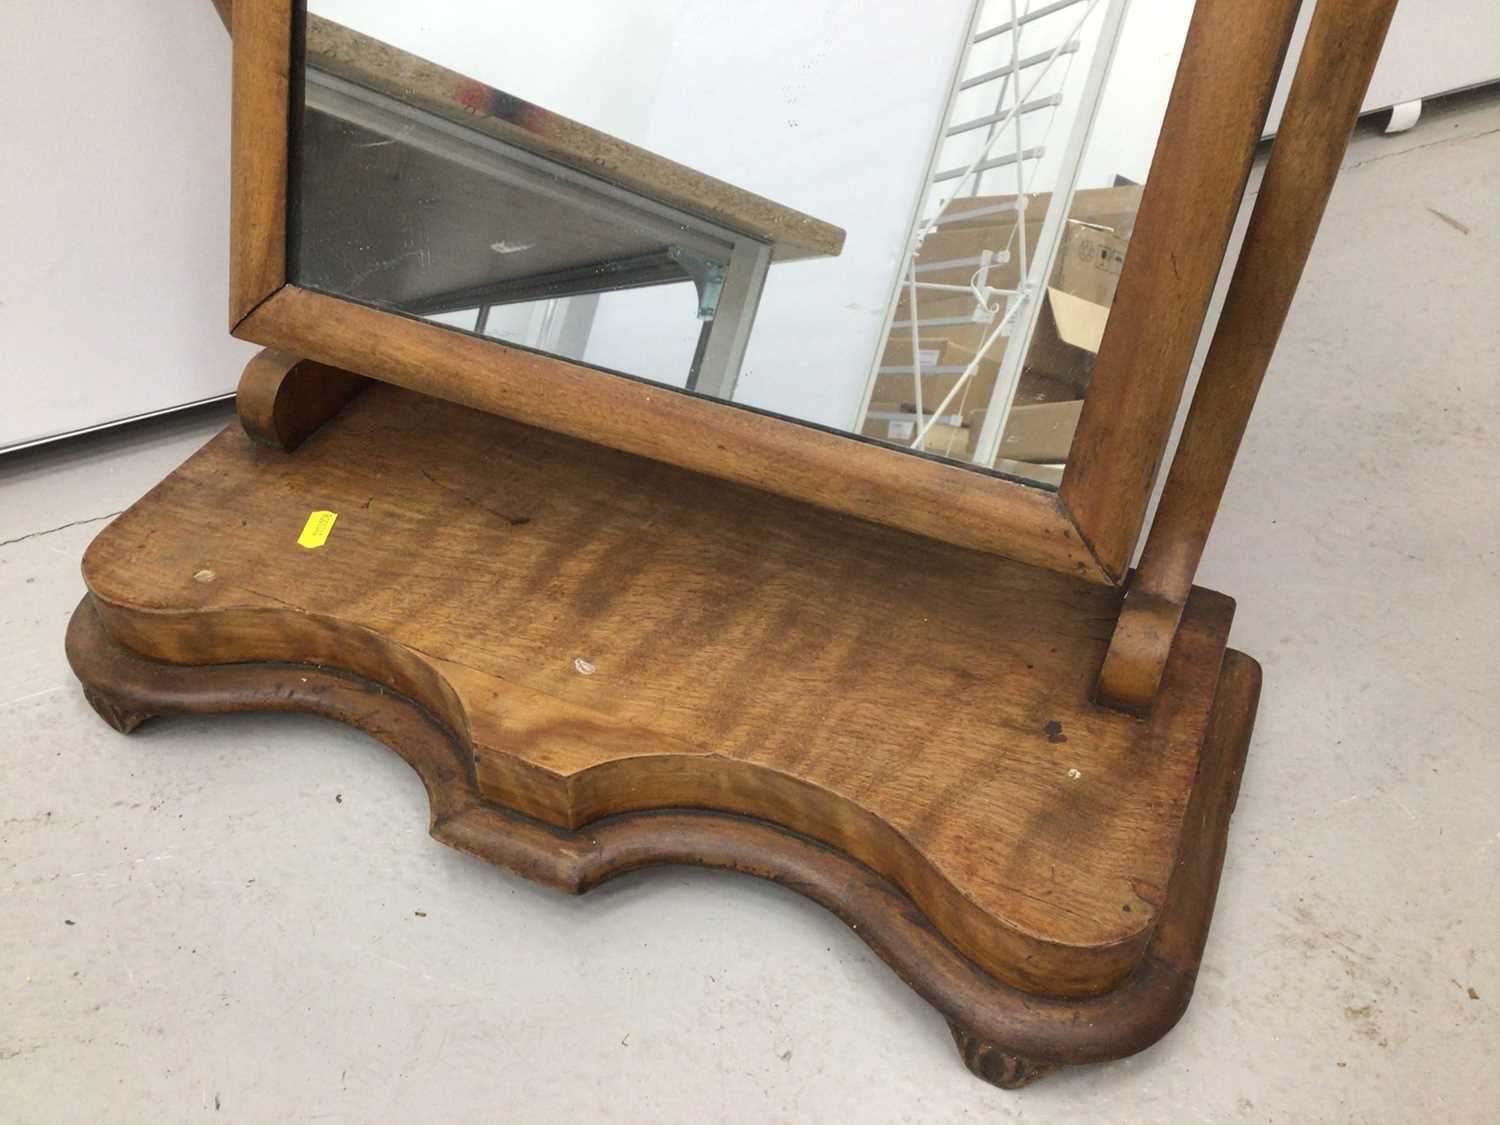 Victorian walnut dressing table mirror, together with small oak bureau and prie Dieu chair - Image 3 of 13